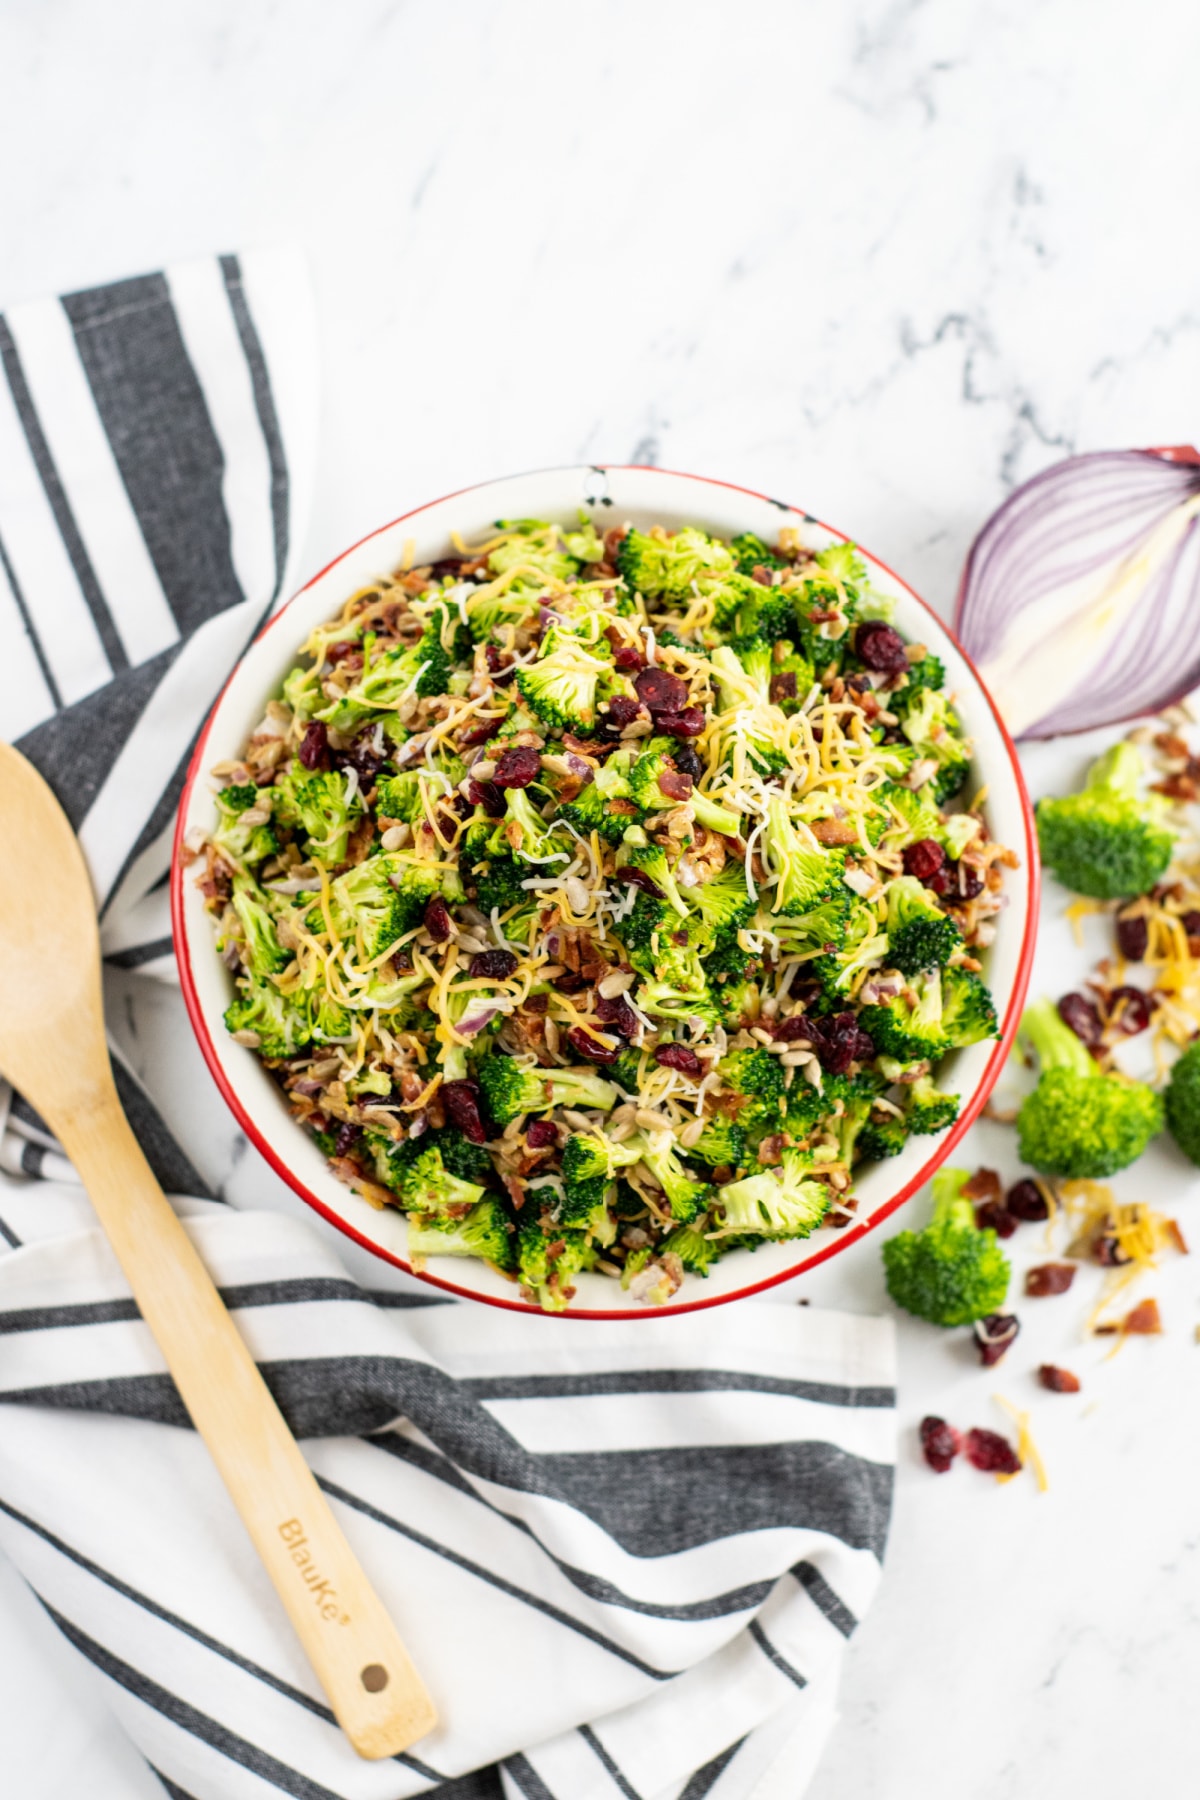 Broccoli salad with craisins from above